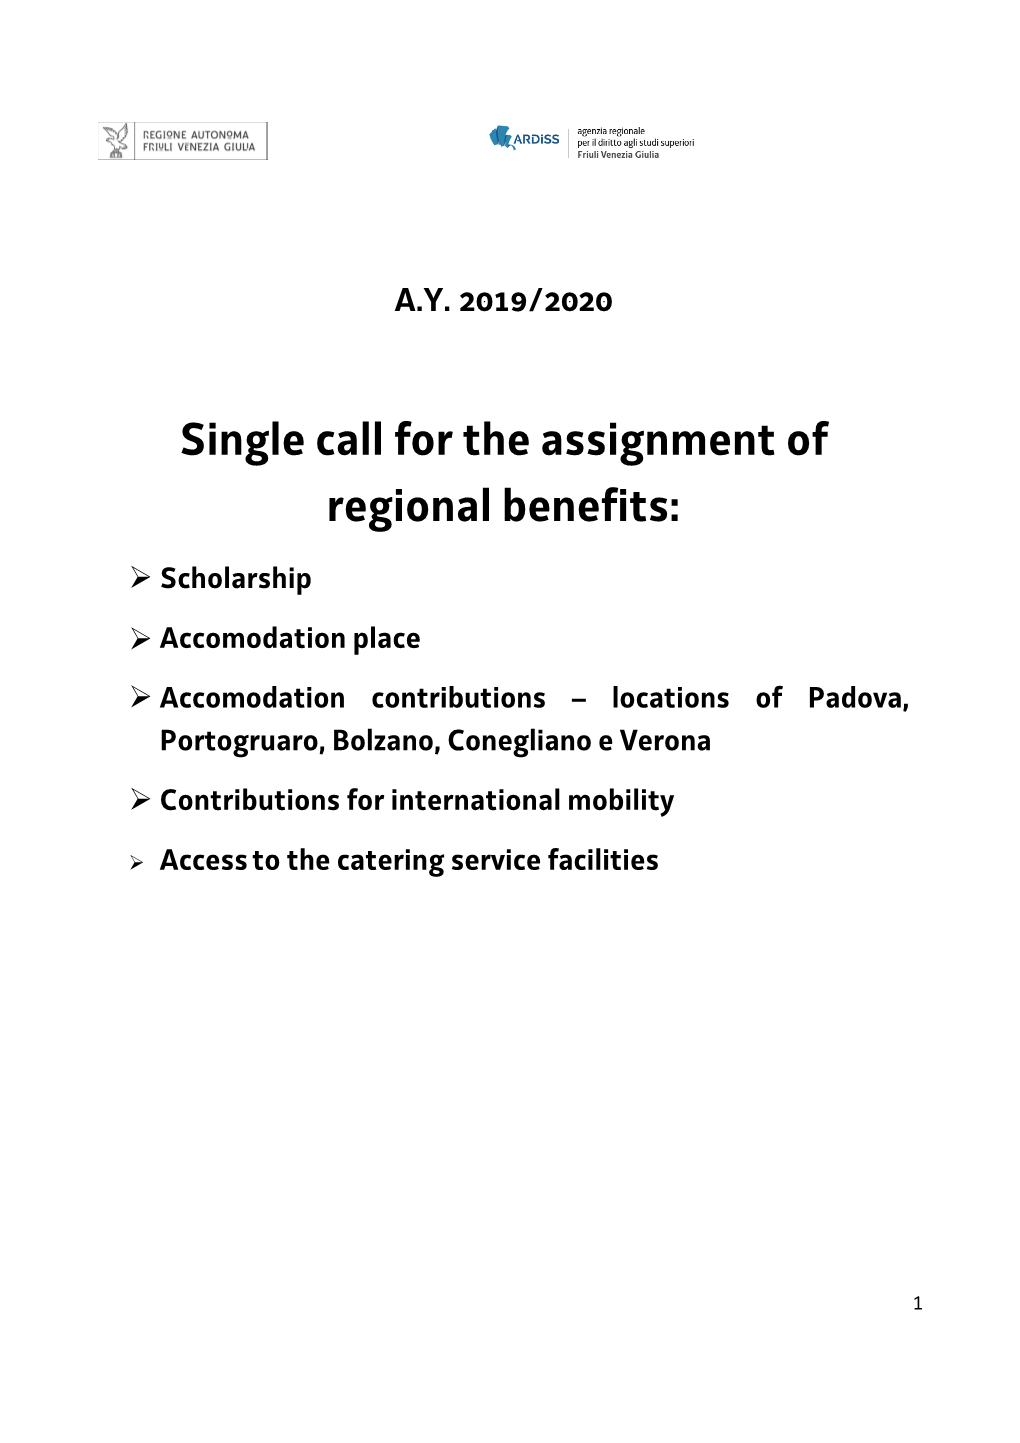 Single Call for the Assignment of Regional Benefits